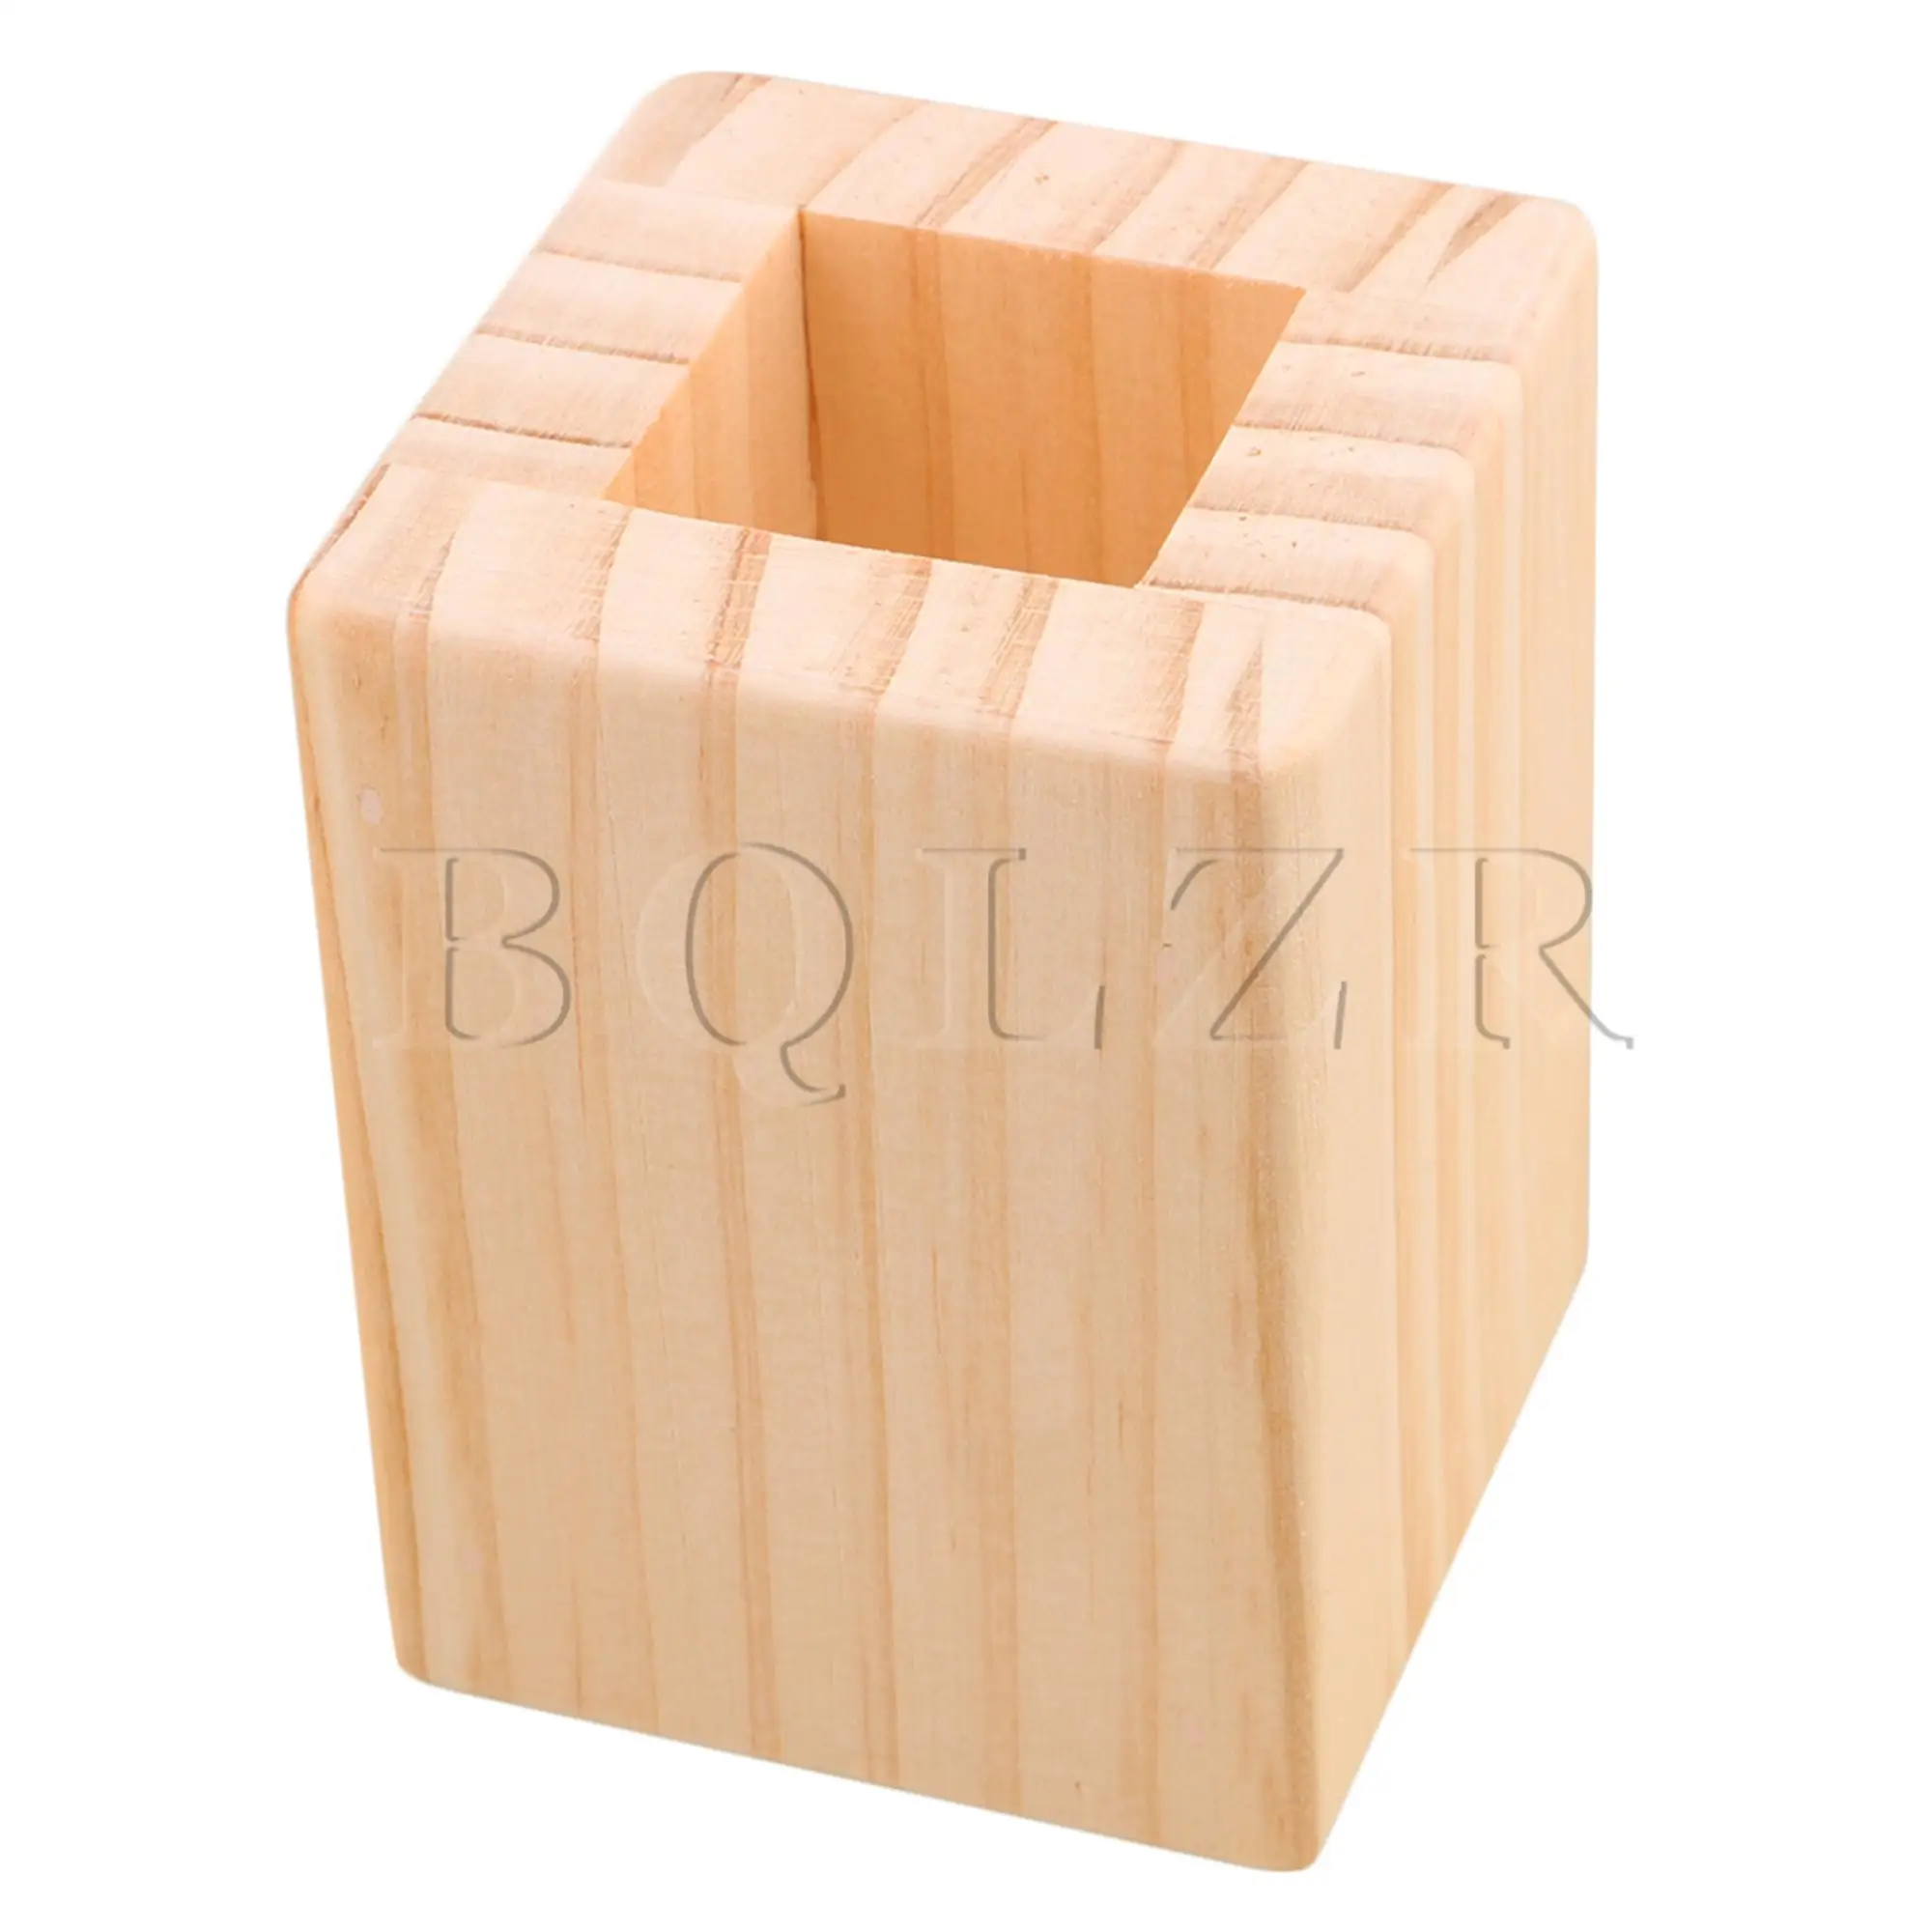 

3cm Closed Square Hole Wood Furniture Lifter Bed Table Riser Add 5cm BQLZR